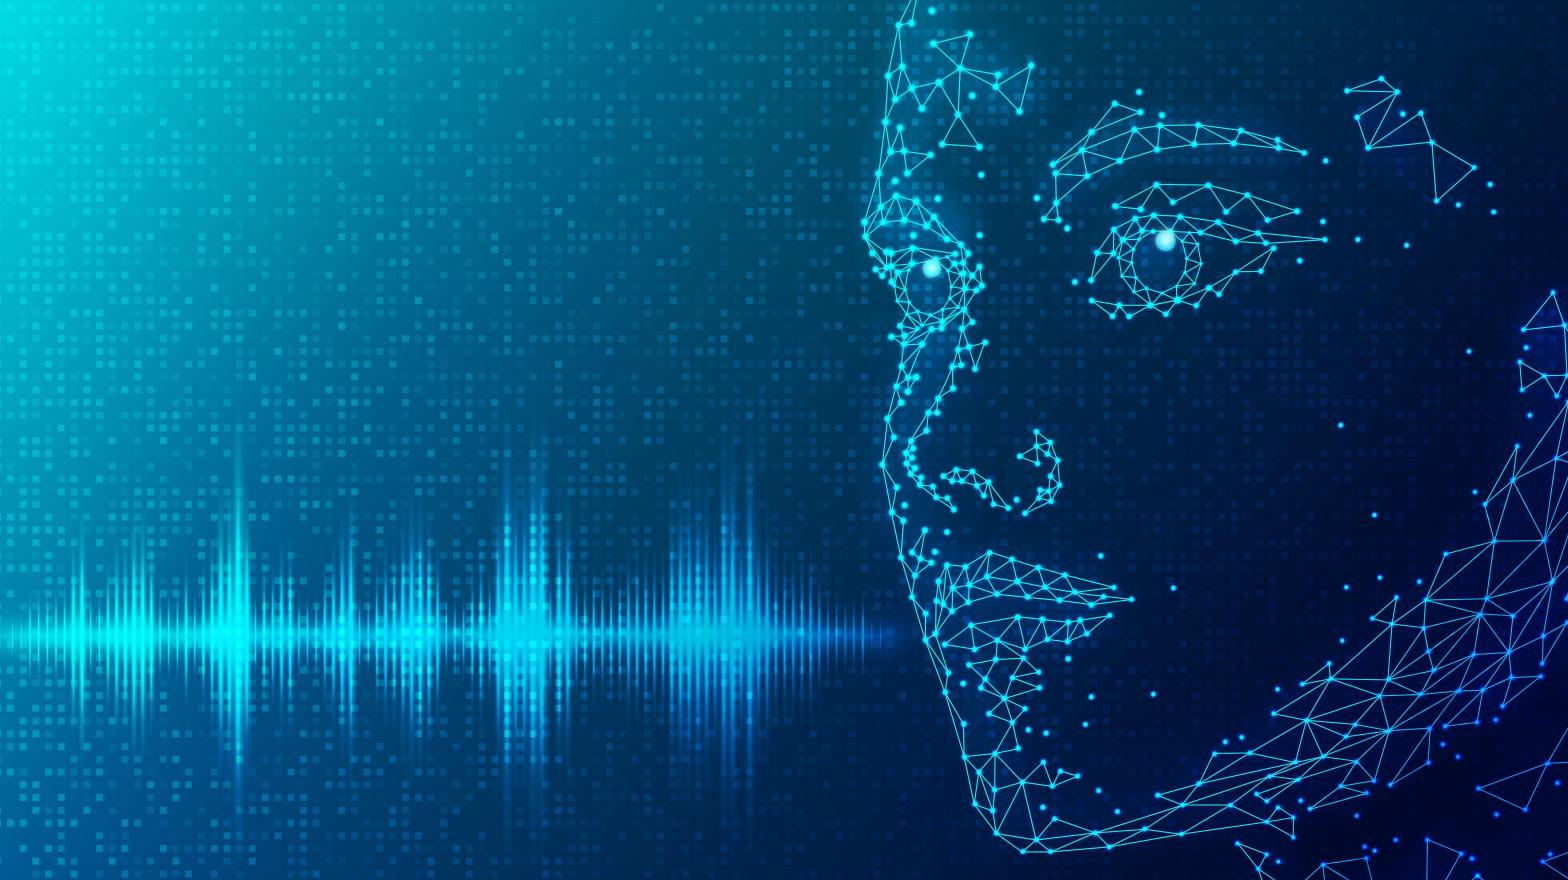 AI voice synthesis is getting more and more sophisticated, which also means it's more open to abuse. (Graphic: ArtemisDiana, Shutterstock)